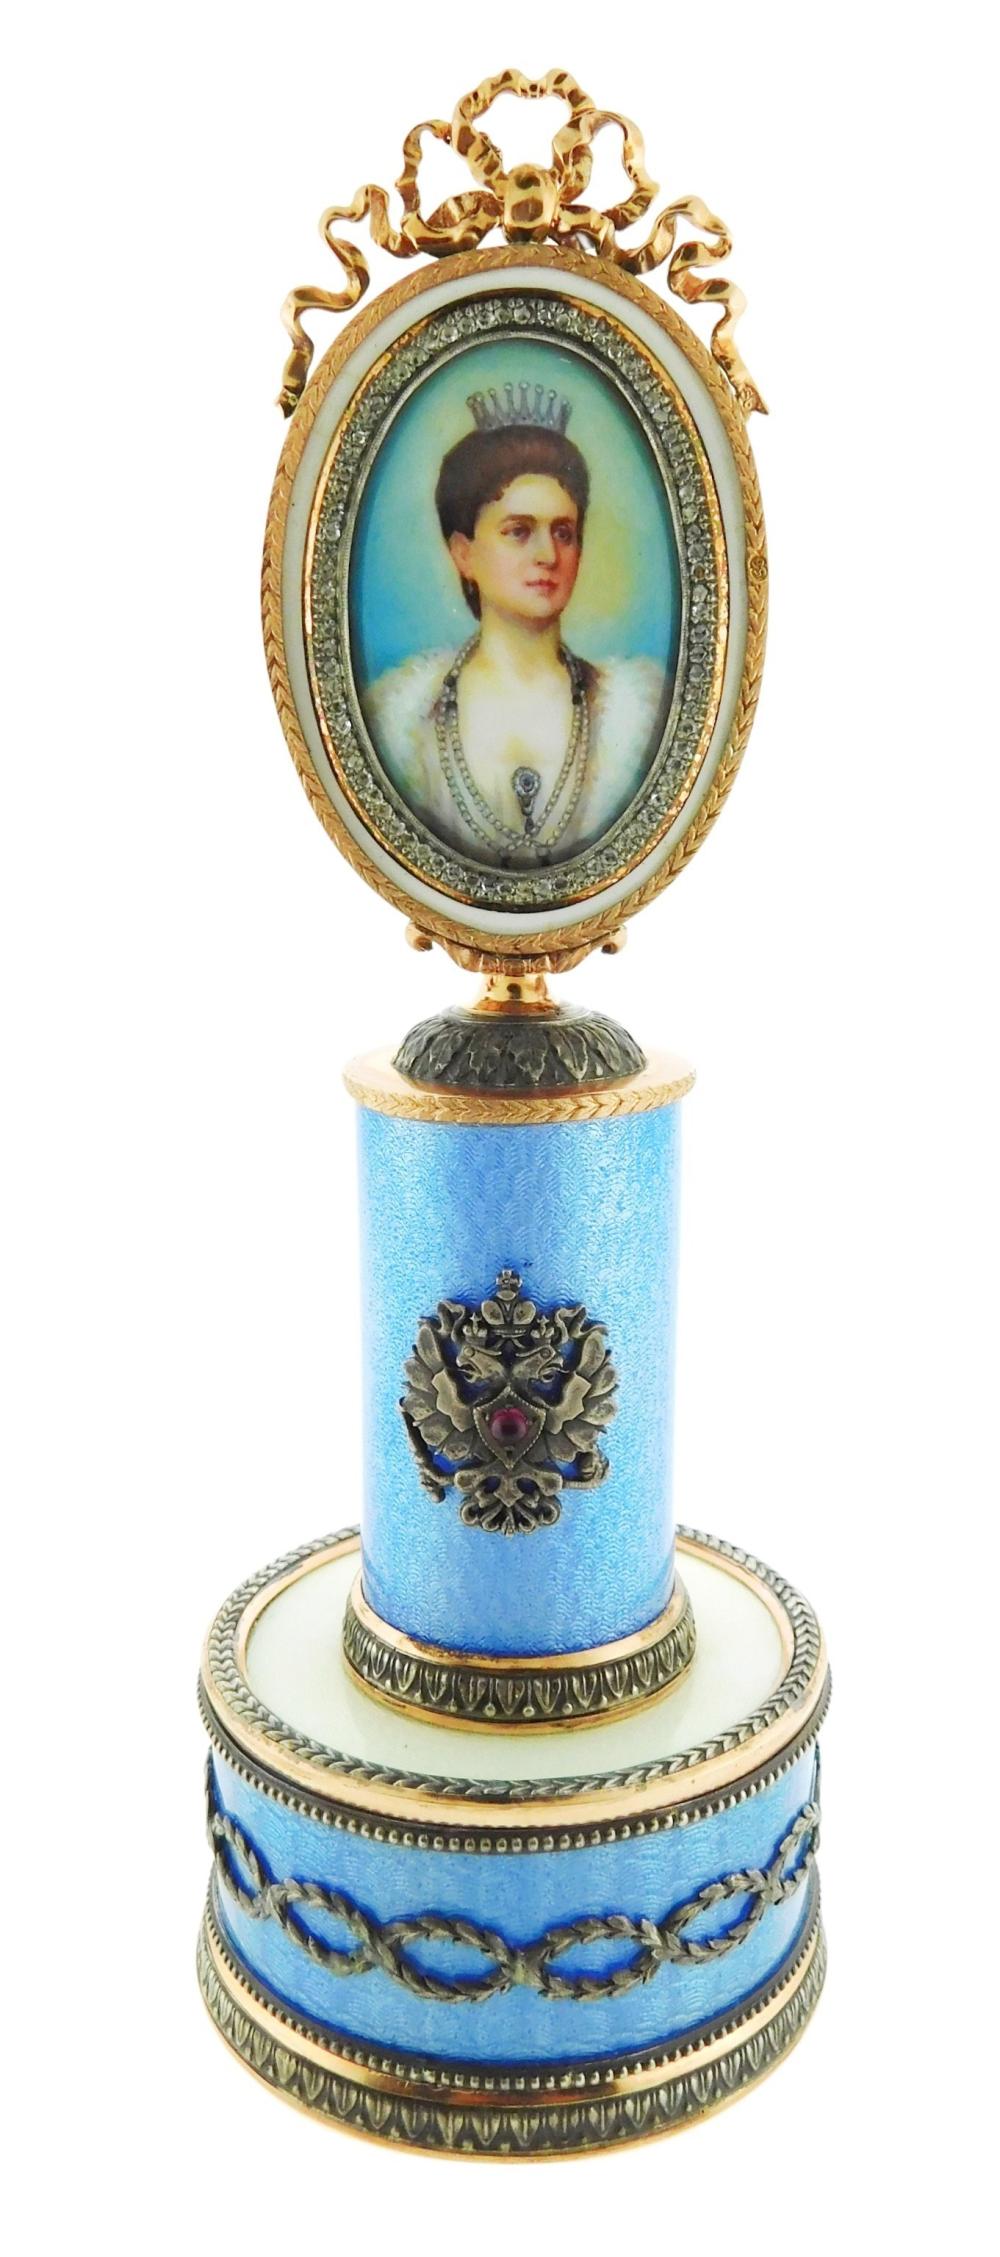 FABERGE STYLE MINIATURE PAINTING 2e2d6f